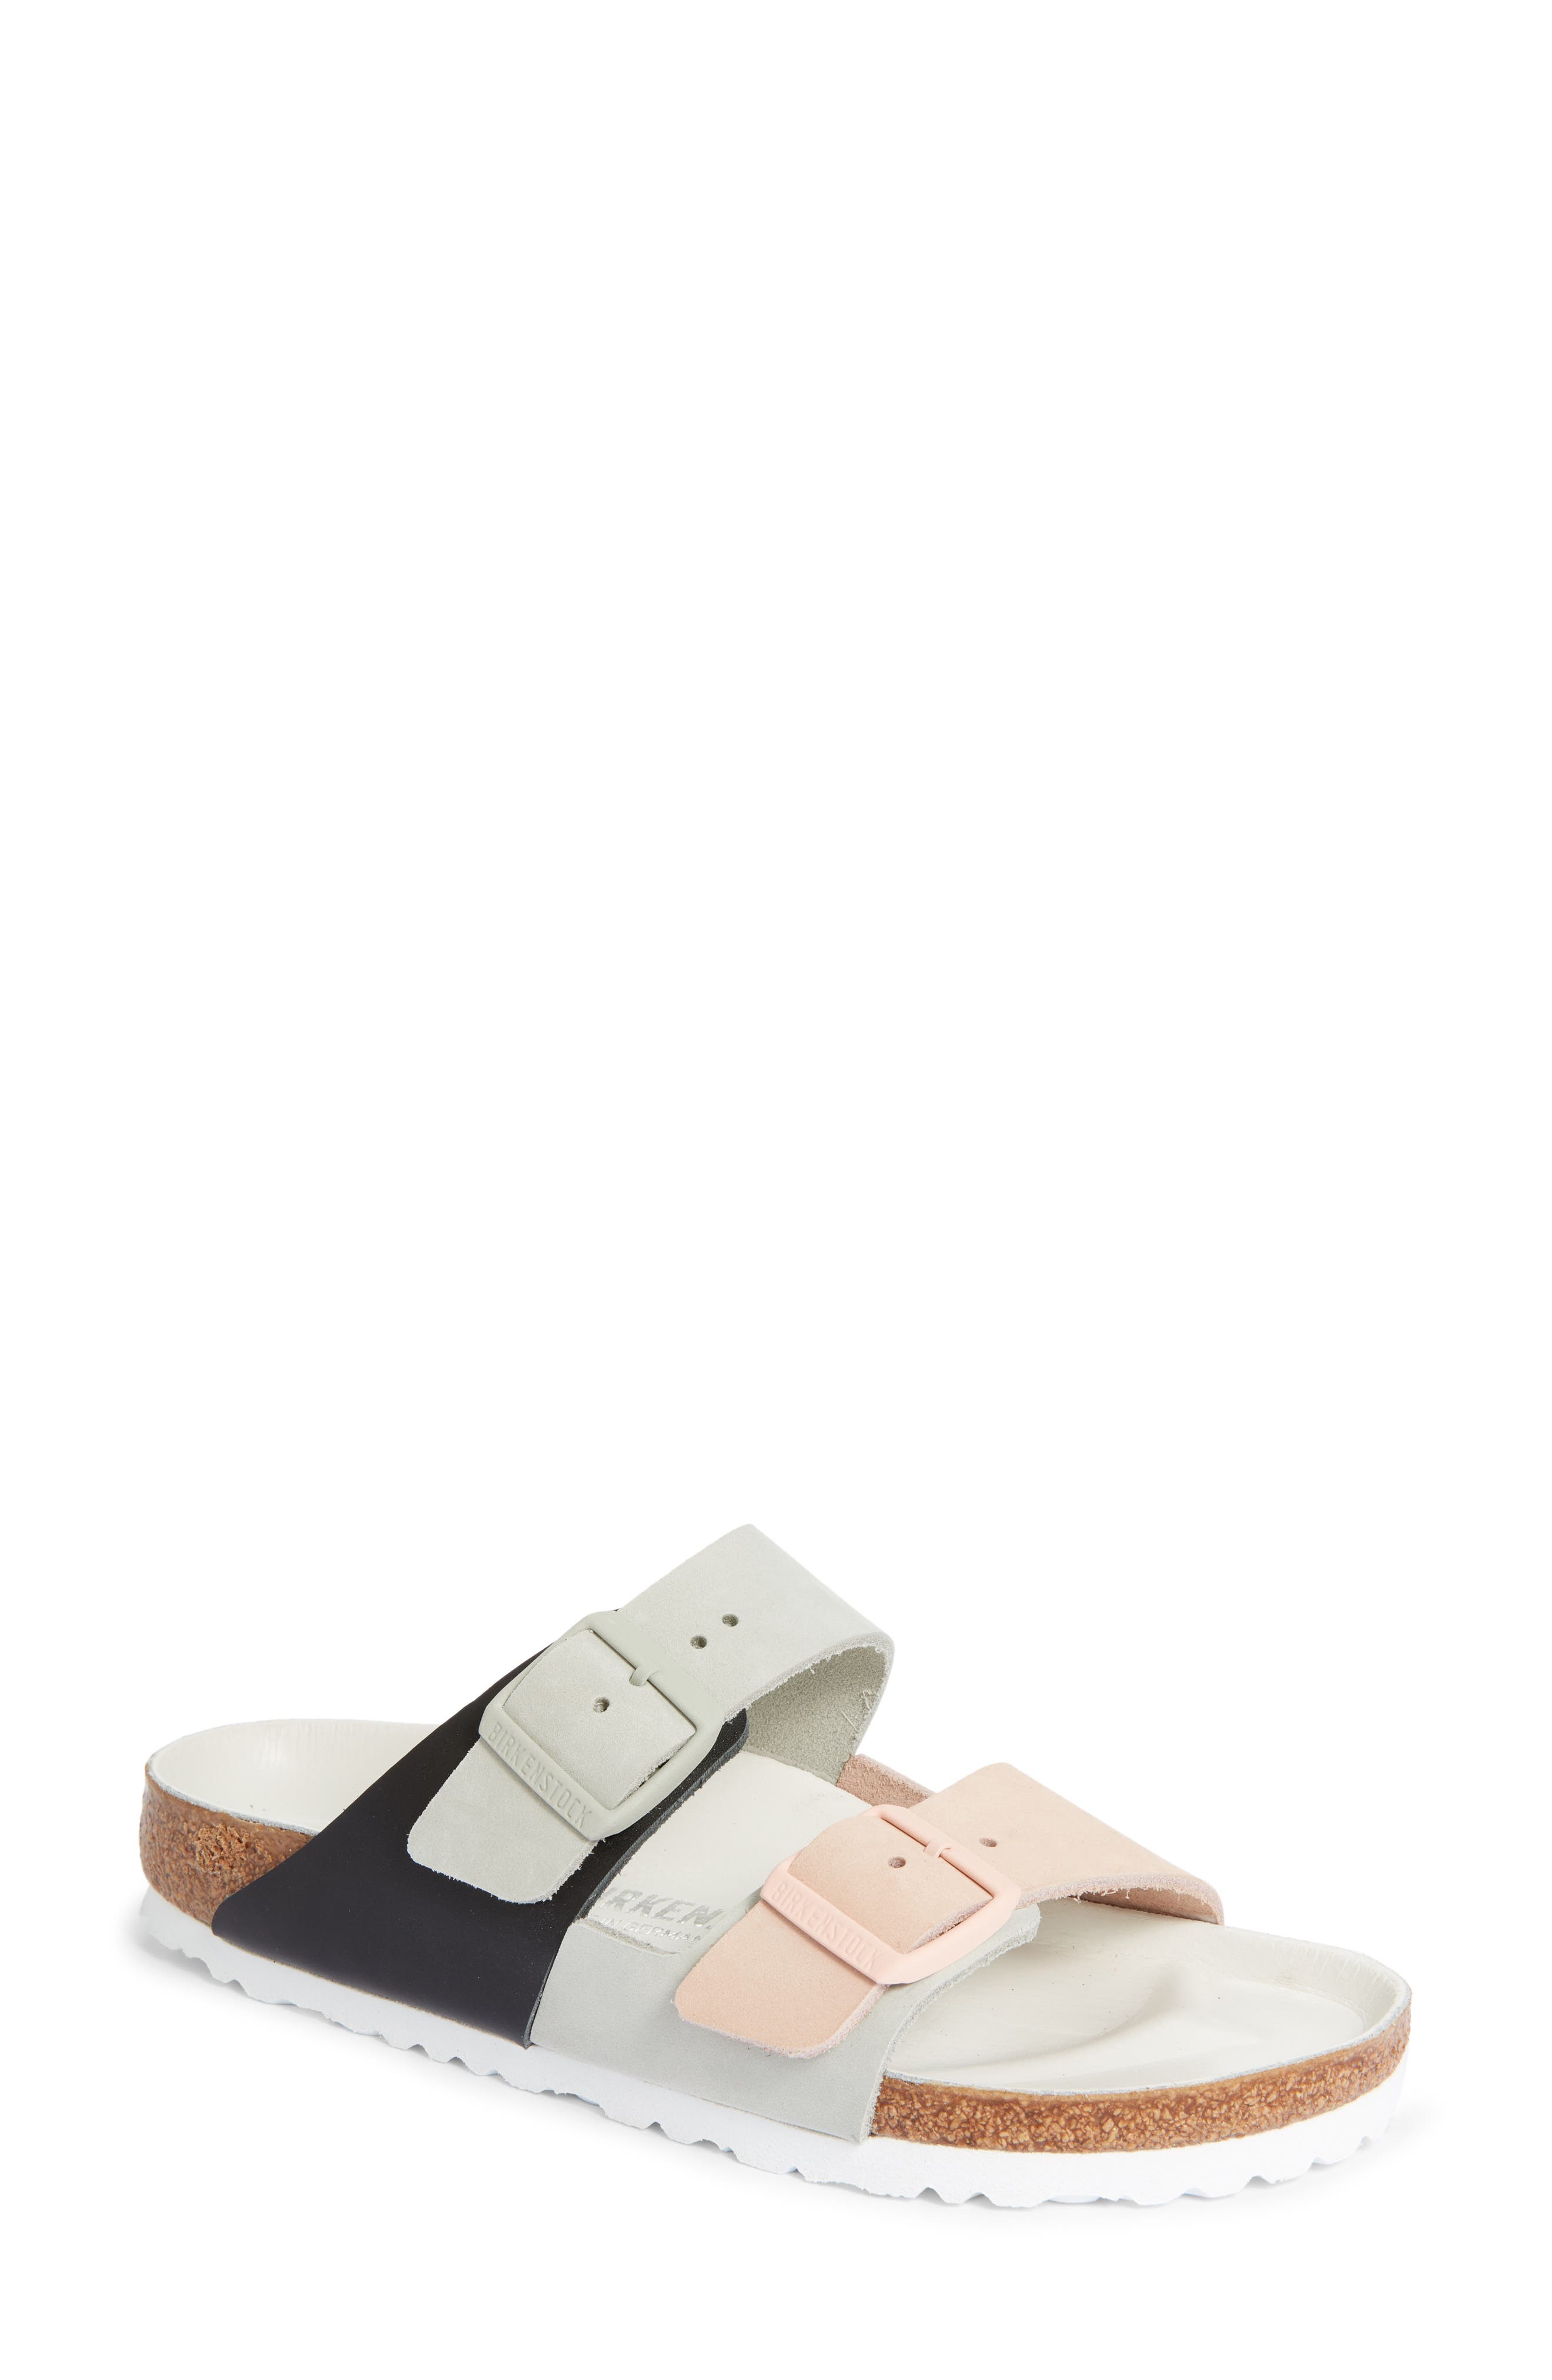 lord and taylor birkenstock womens